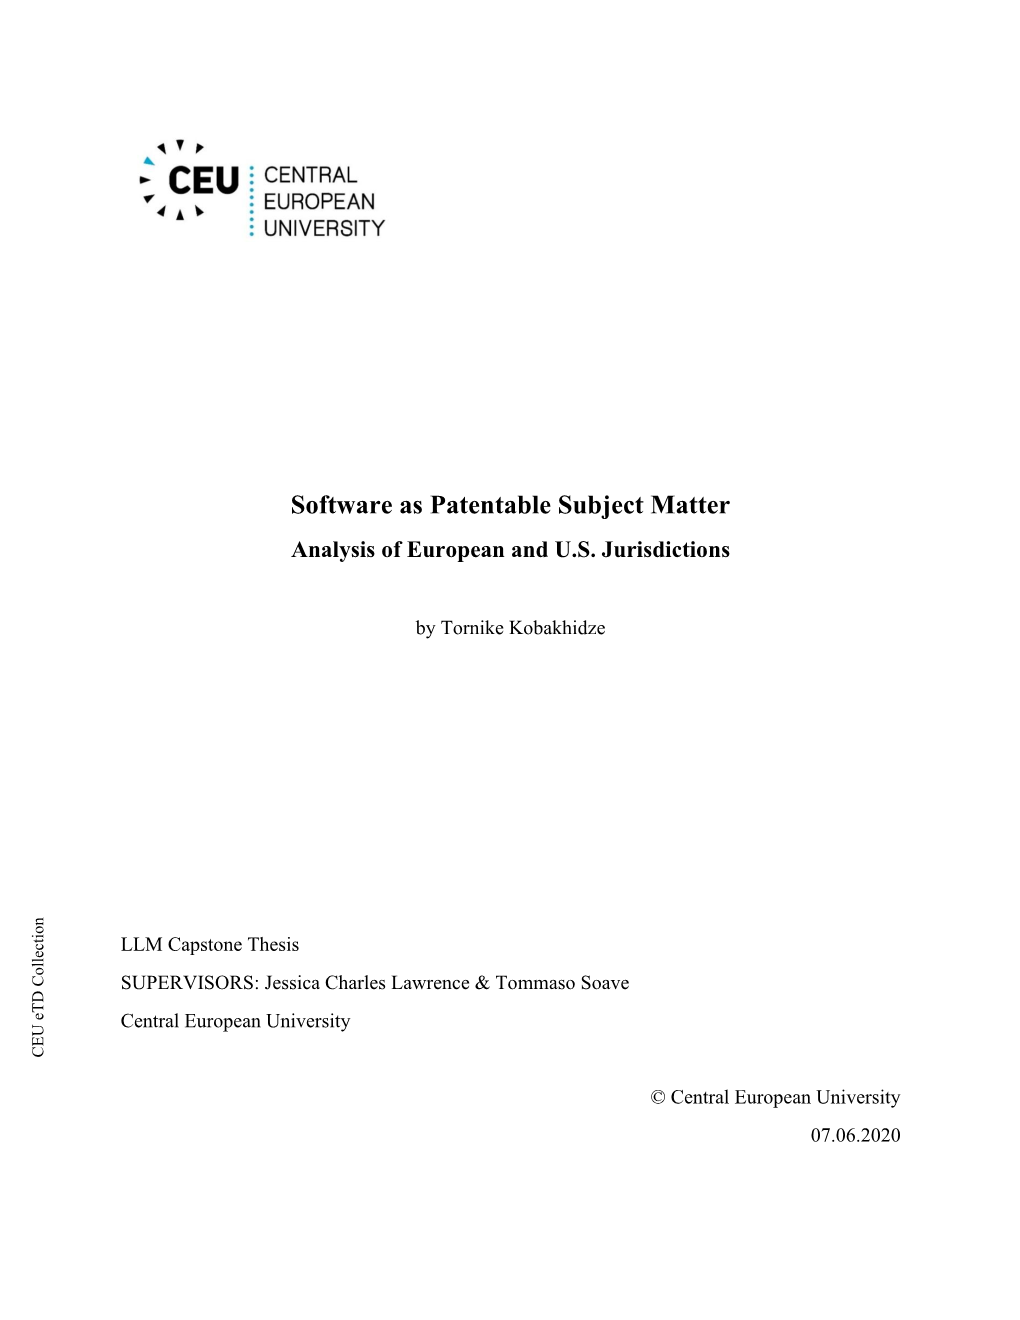 Software As Patentable Subject Matter Analysis of European and U.S